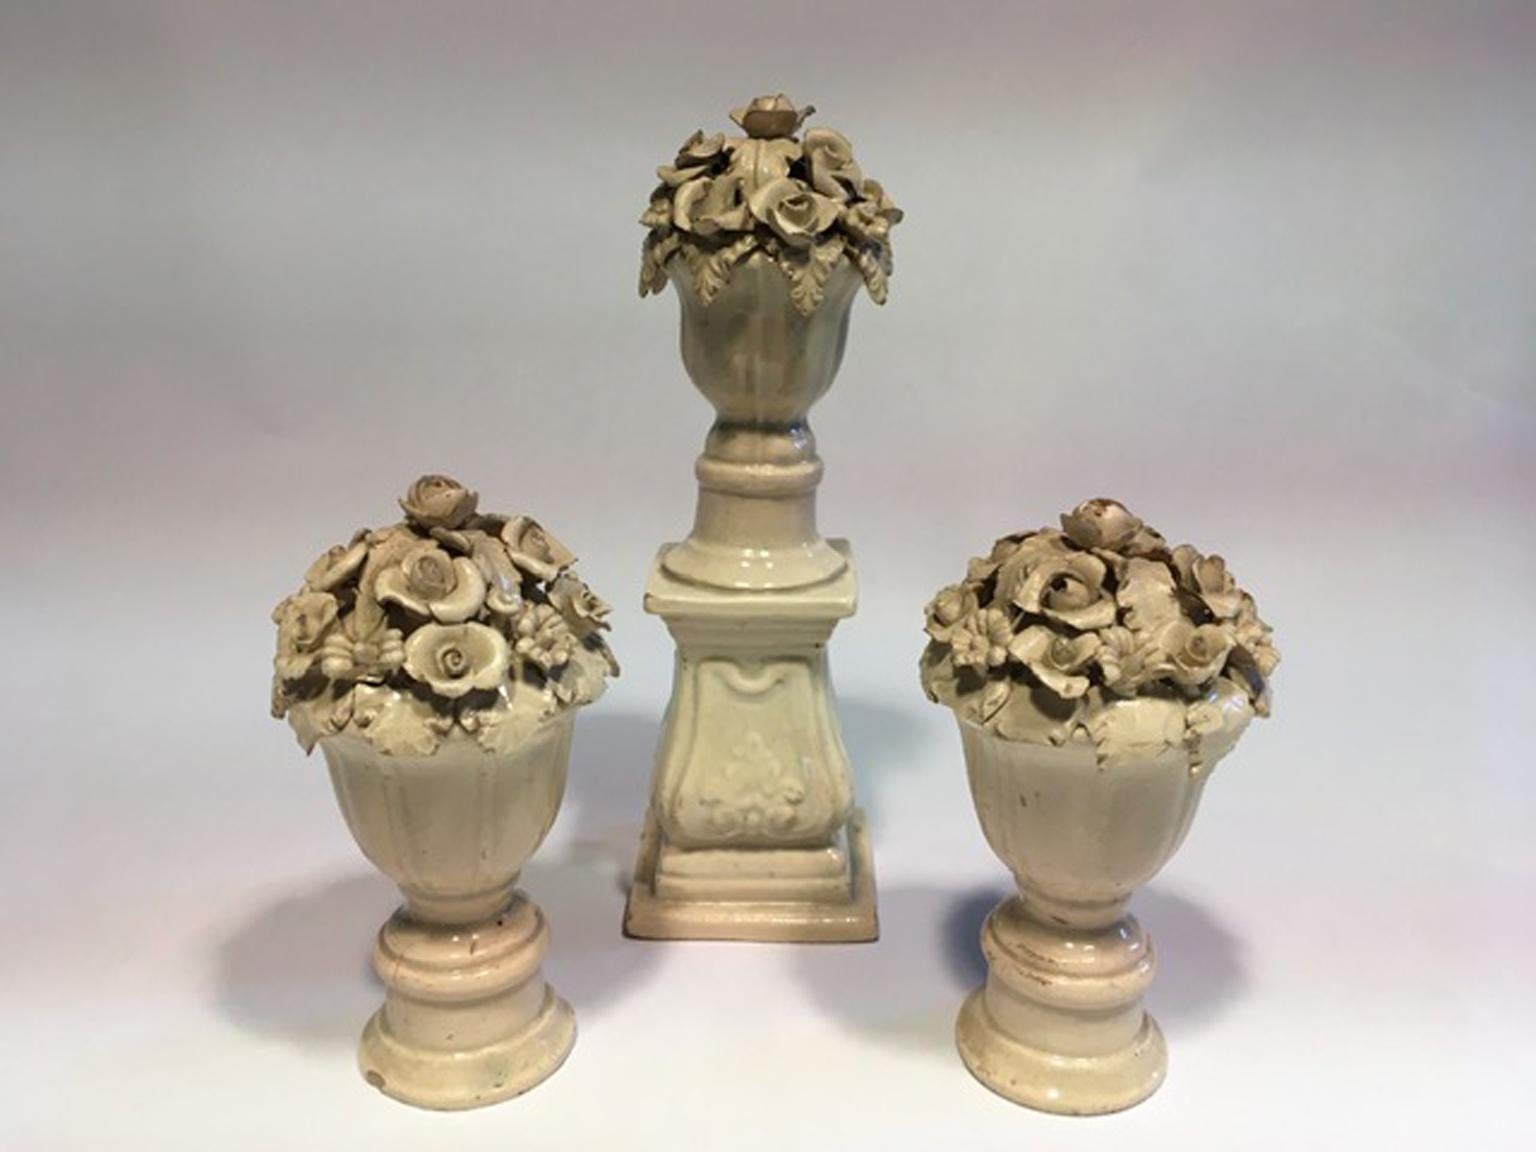 This is a very elegant set of three pieces in white porcelain original from Italy, handcrafted in the 18th century and create to adorn the table during important dinner, usually they was displayed with flowers and green branches to look as an